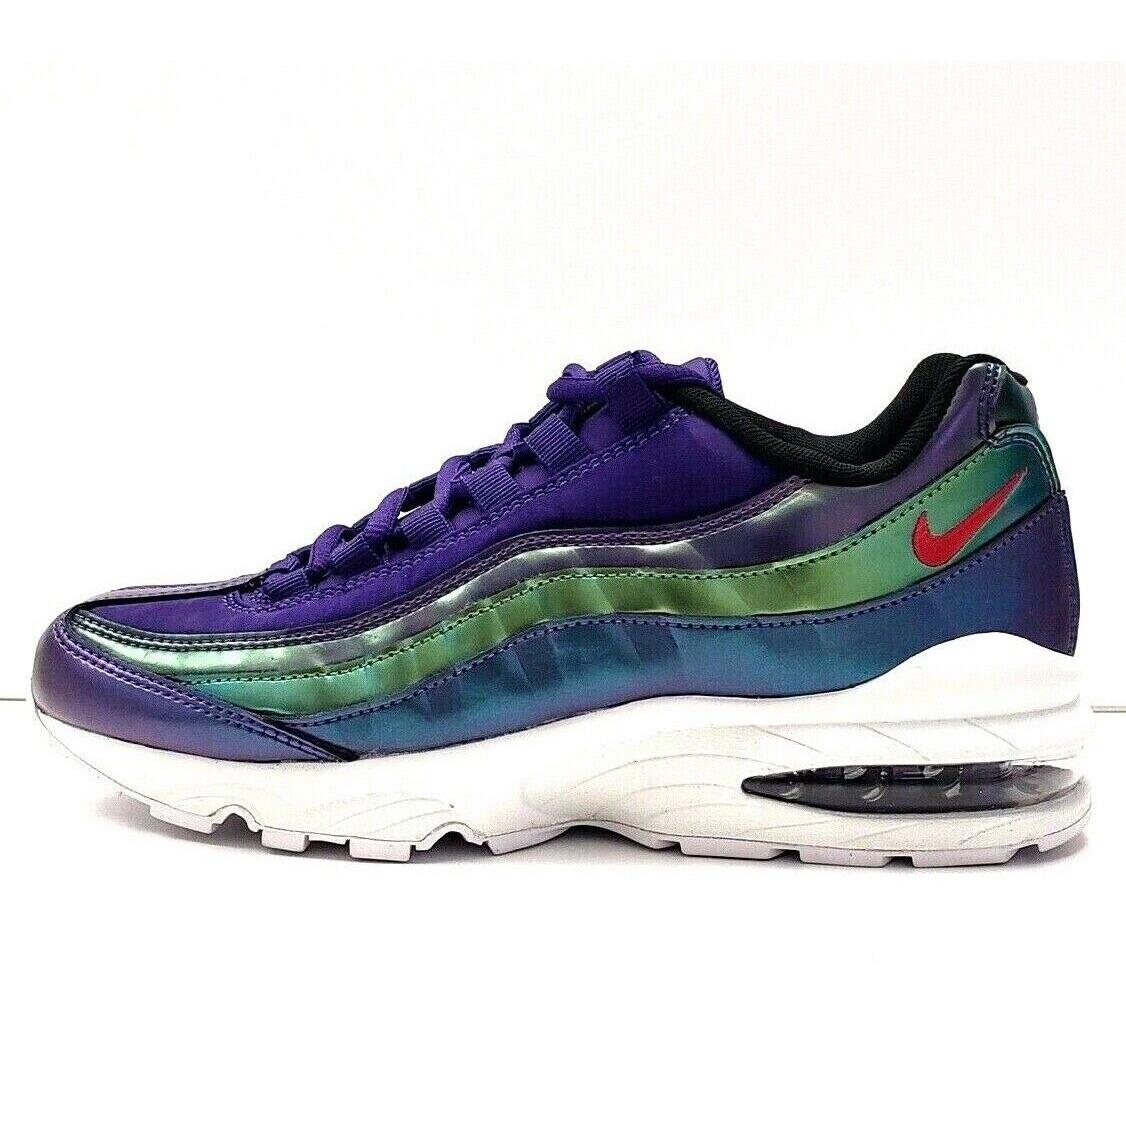 Nike Air Max 95 SE Running Shoes Grade School 6.5Y or Womens 8